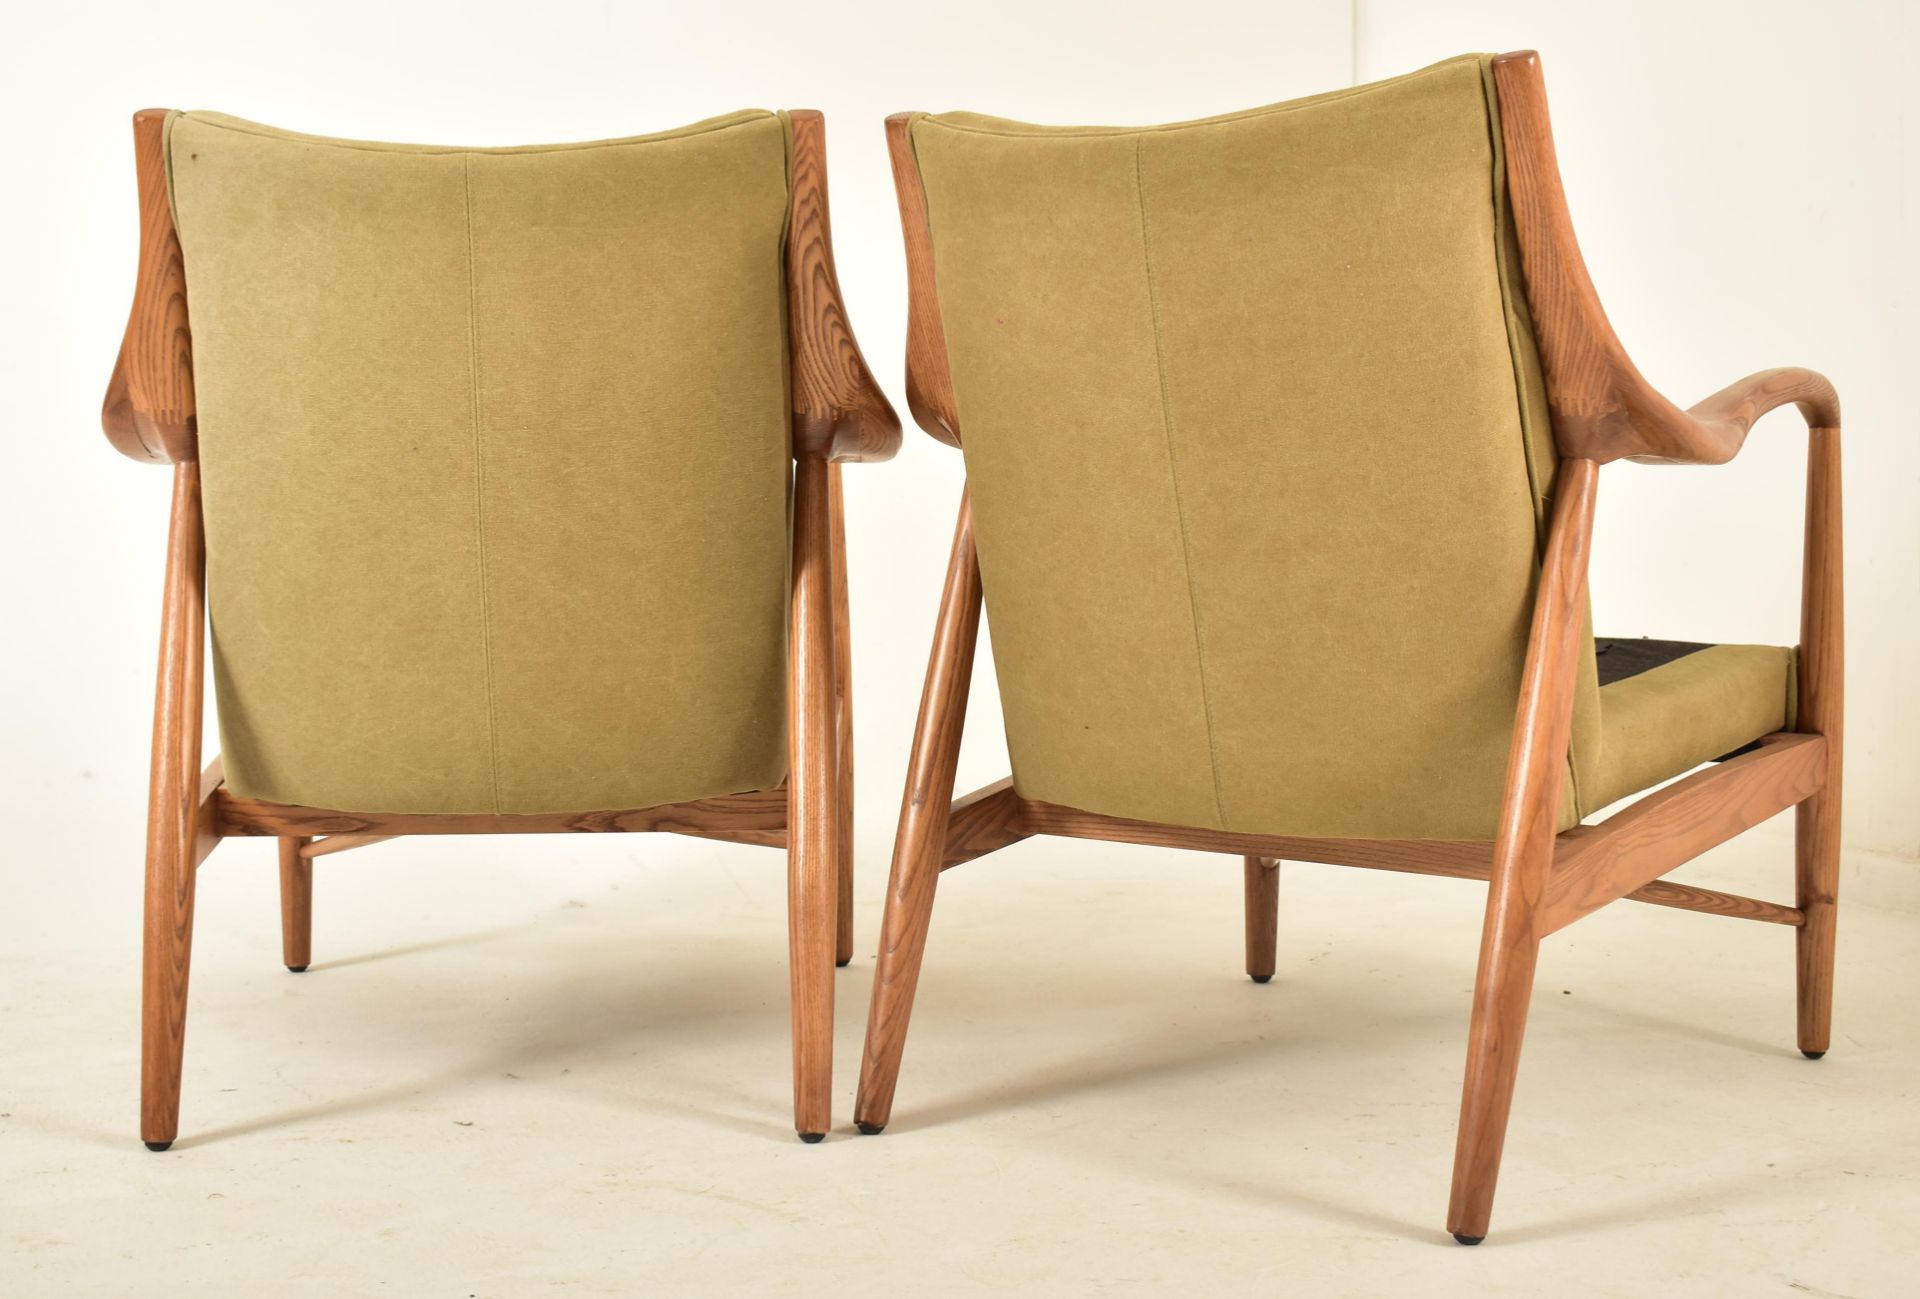 PAIR OF CONTEMPORARY RETRO STYLE OAK FRAMED ARMCHAIRS - Image 4 of 4